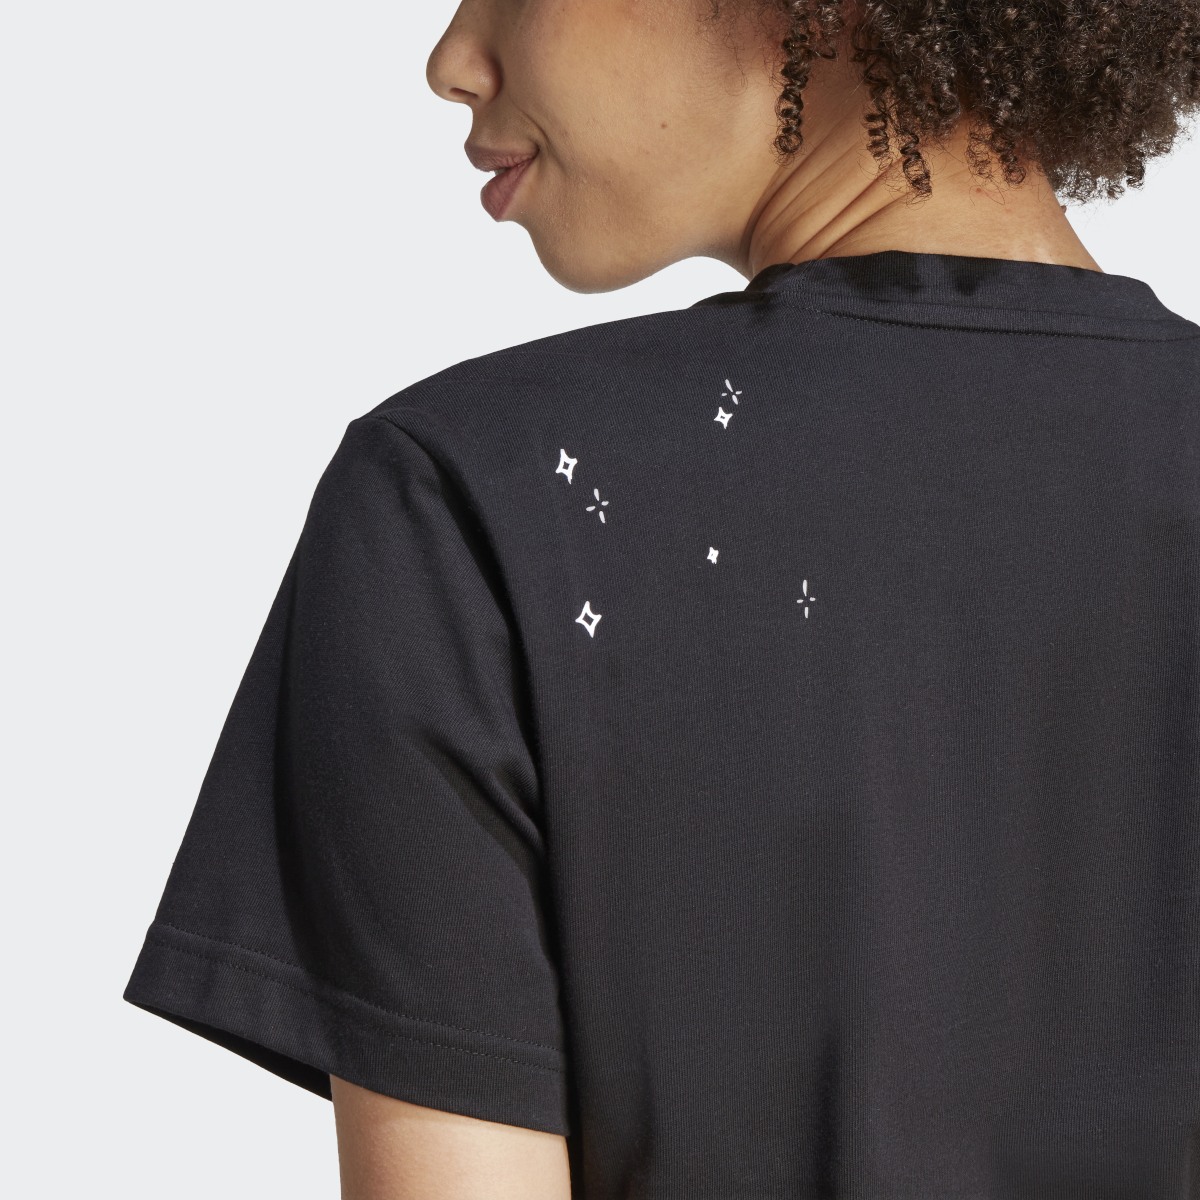 Adidas Scribble Embroidery Crop T-Shirt. 7